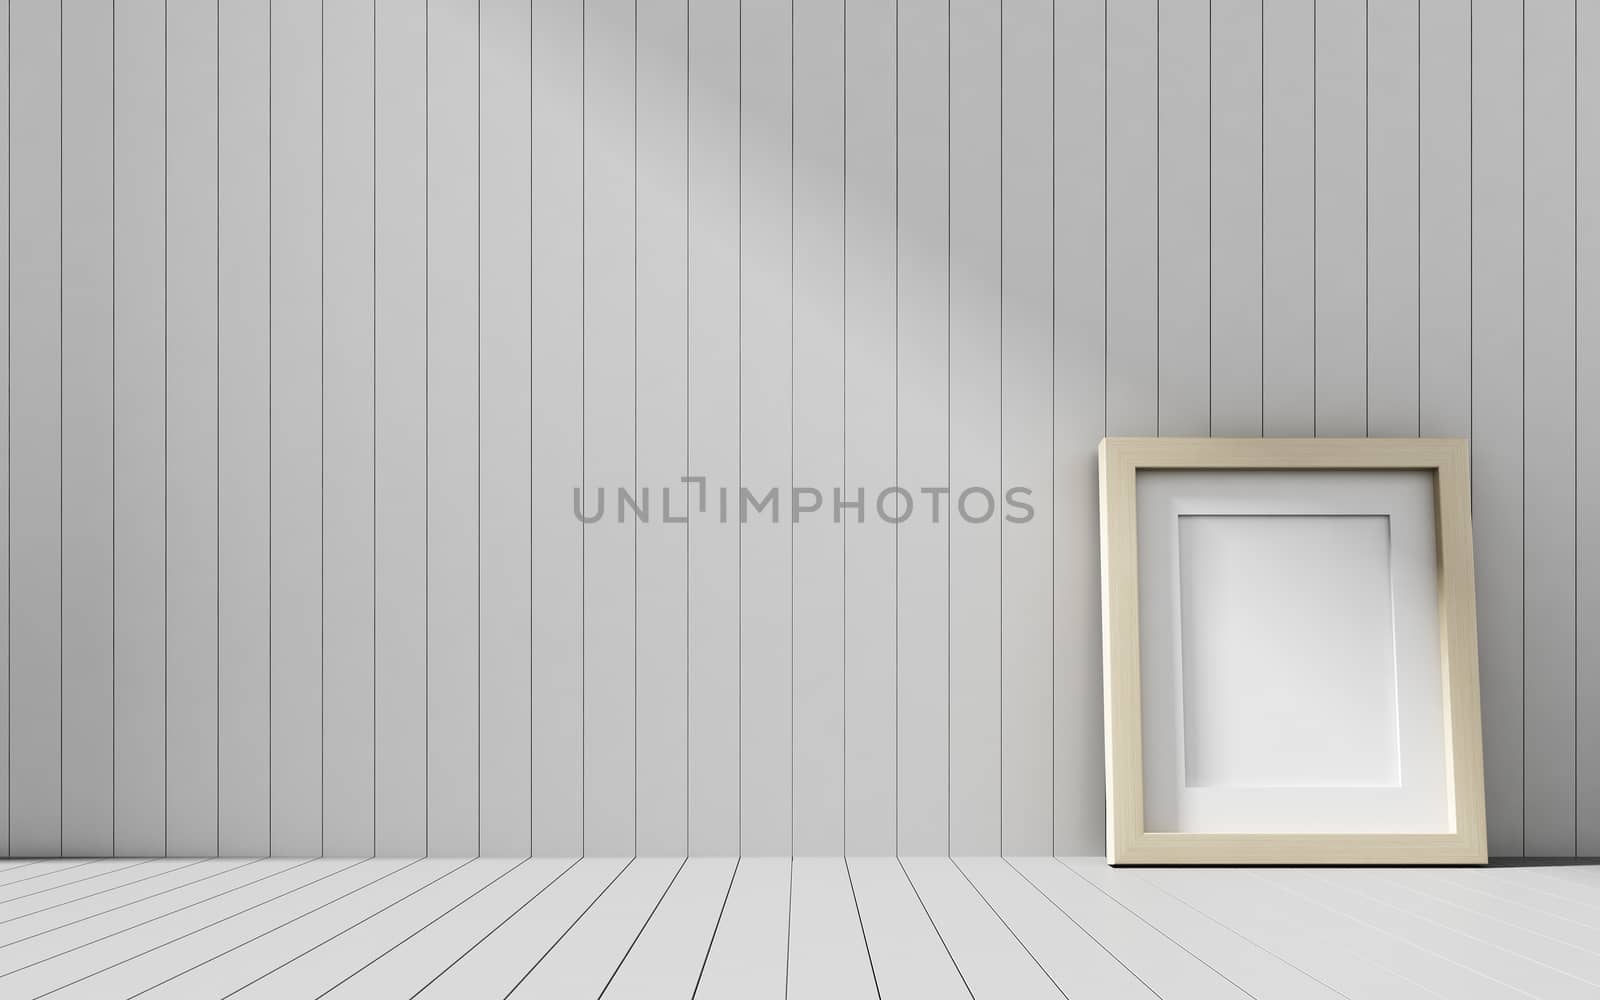 Realistic picture frame on wood background, Perfect for your presentations.